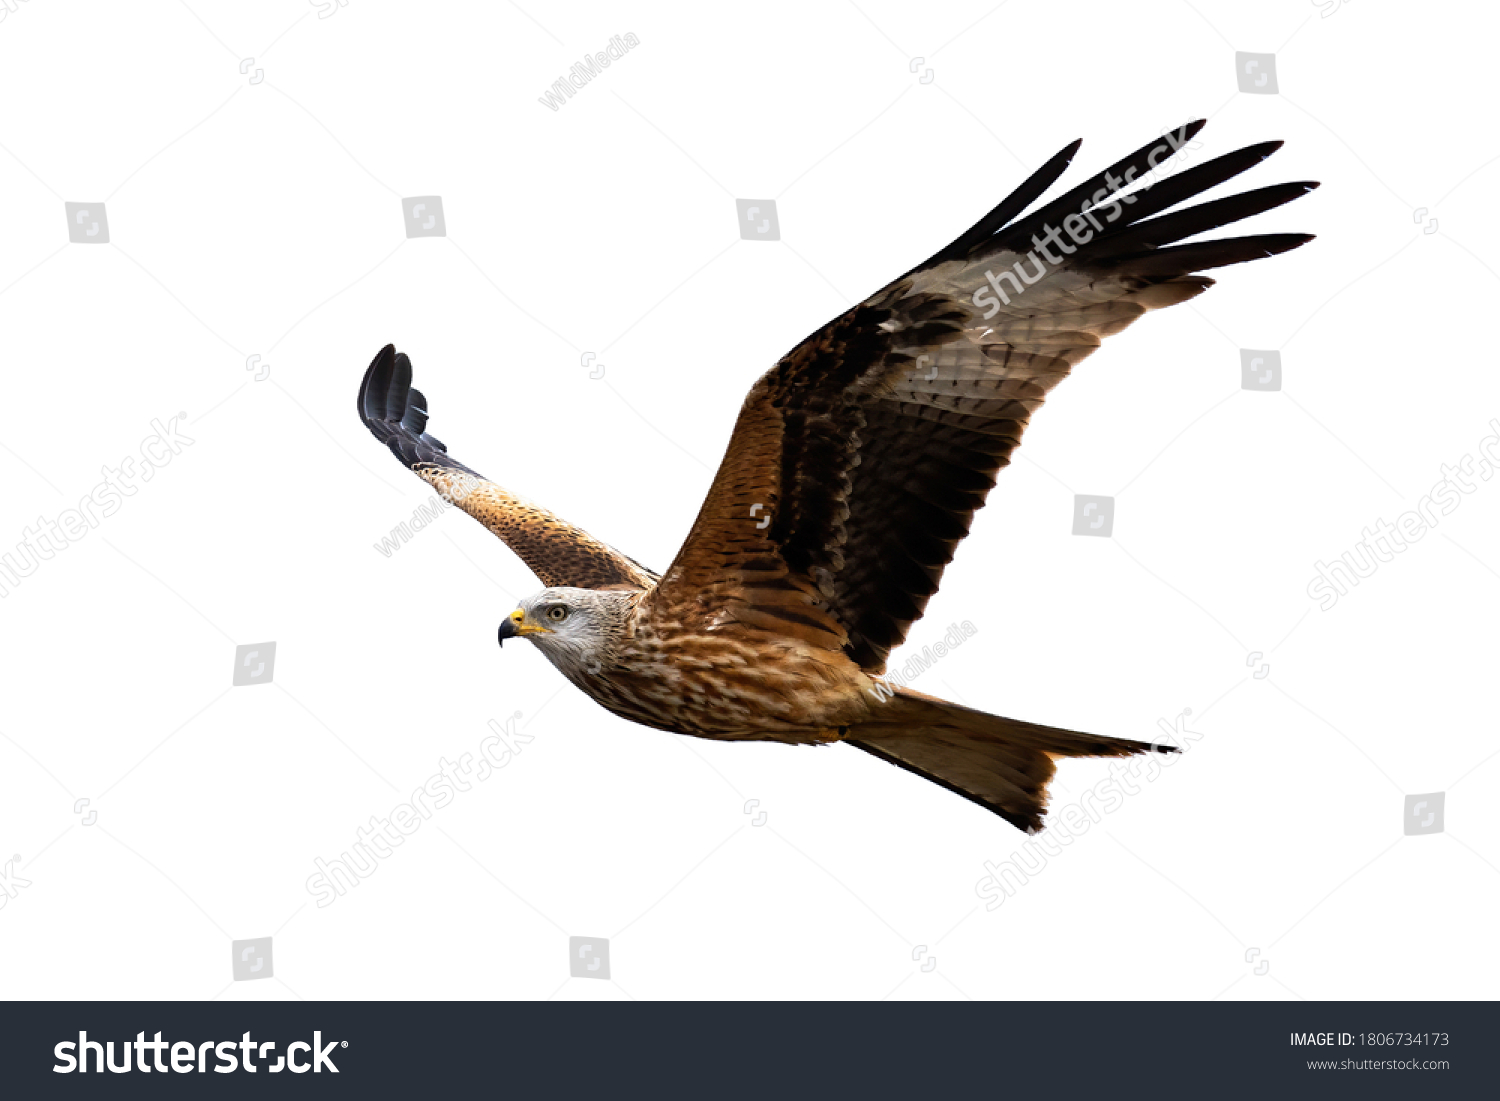 Majestic red kite, milvus milvus, in flight isolated on white background. Magnificent feathered predator with spread wings cut out on blank. Wild predator hovering in the air with empty backdrop. #1806734173